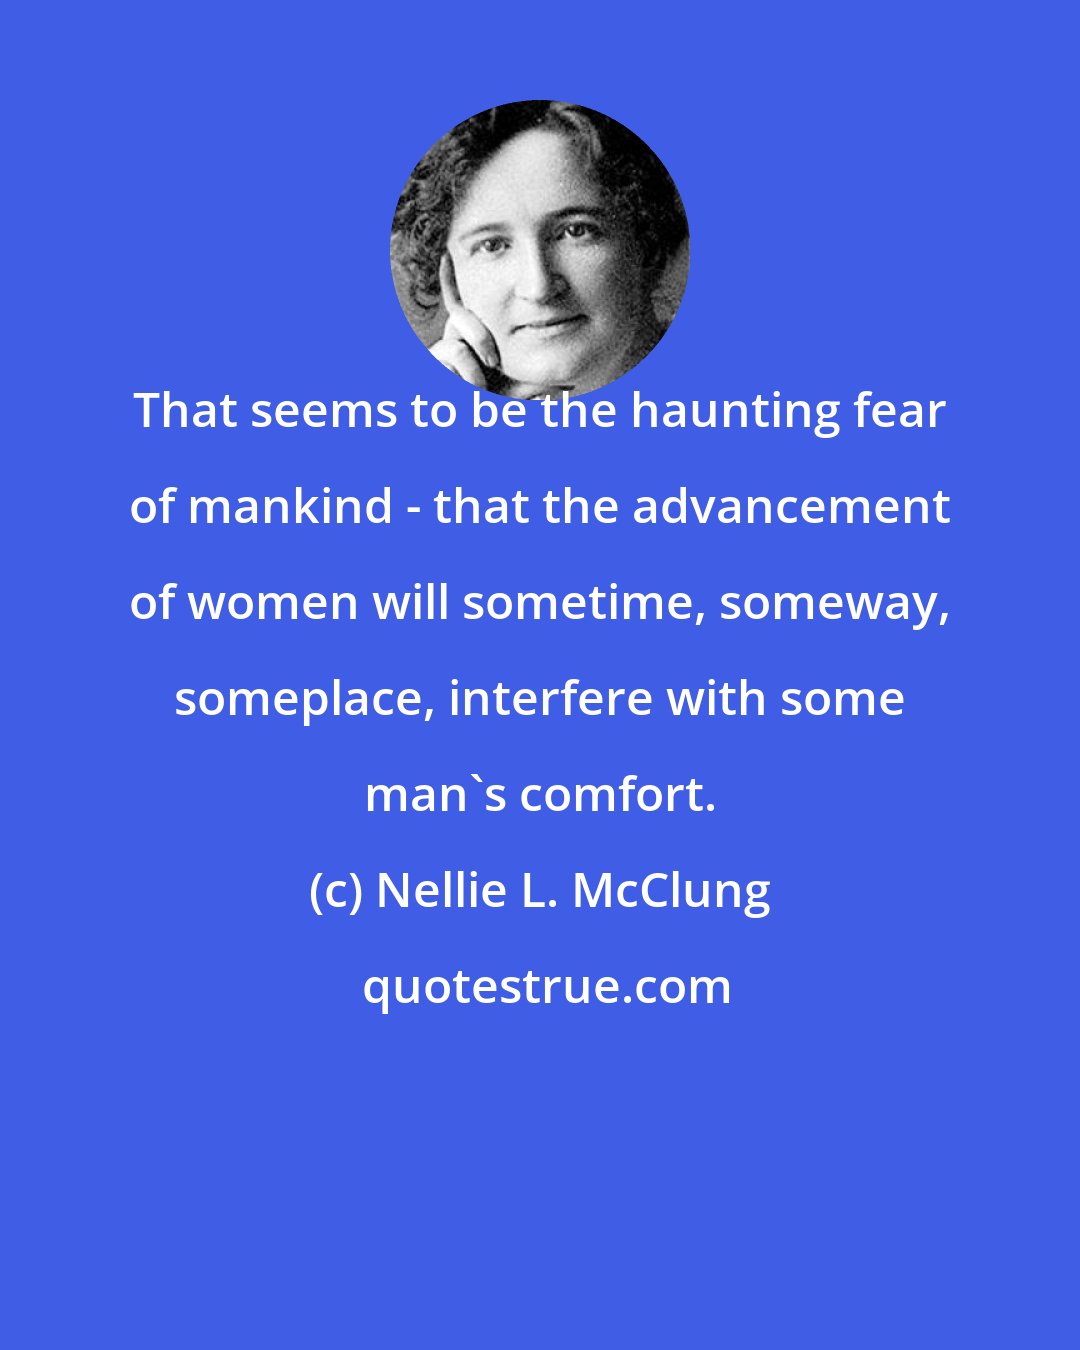 Nellie L. McClung: That seems to be the haunting fear of mankind - that the advancement of women will sometime, someway, someplace, interfere with some man's comfort.